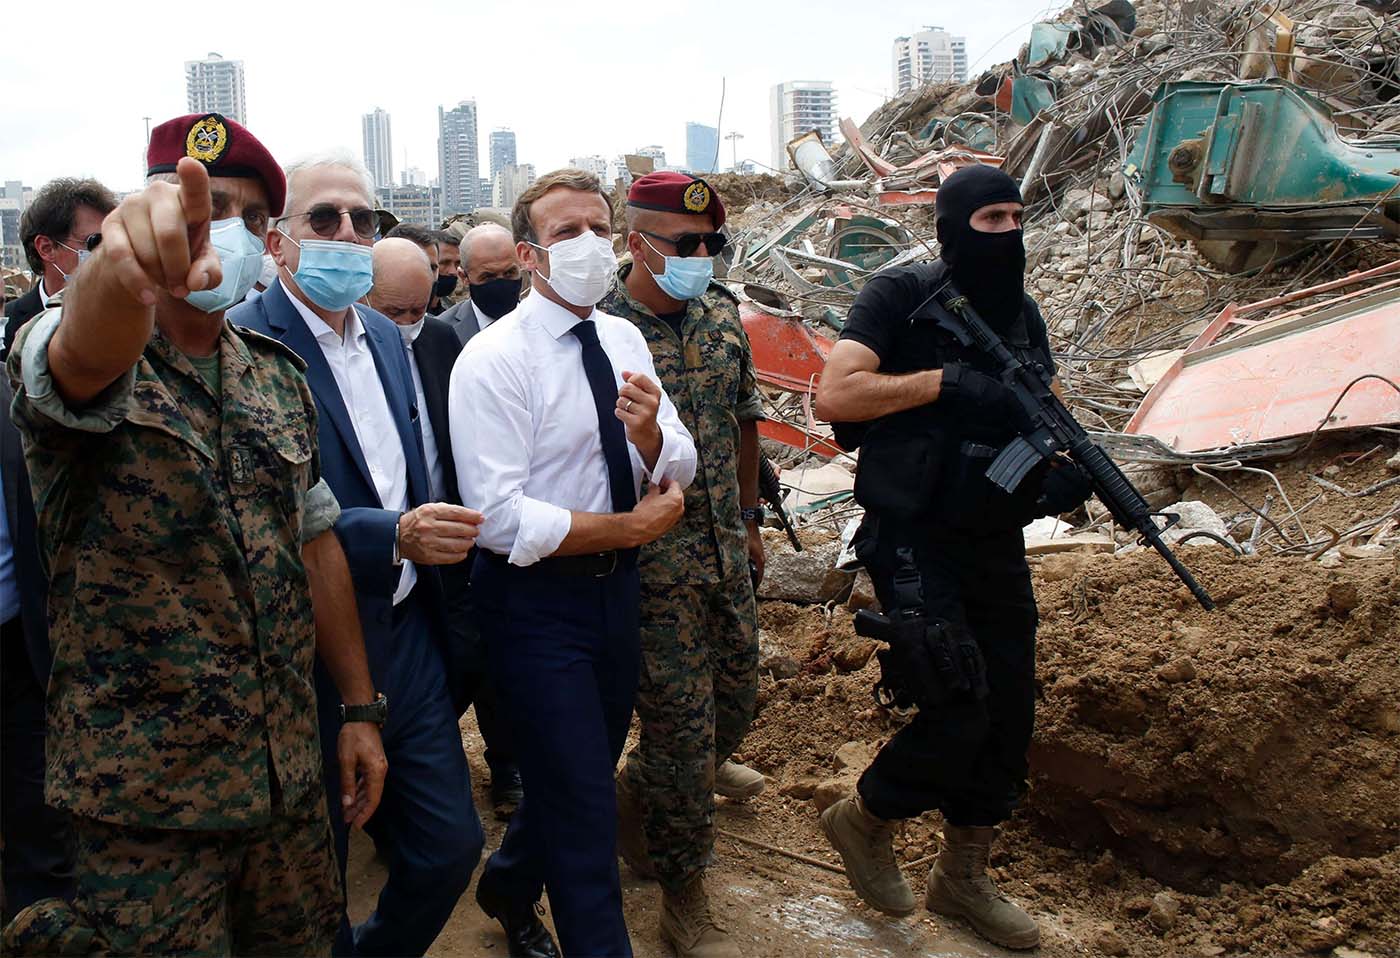 French President Emmanuel Macron visits the devastated site of the explosion at the port of Beirut